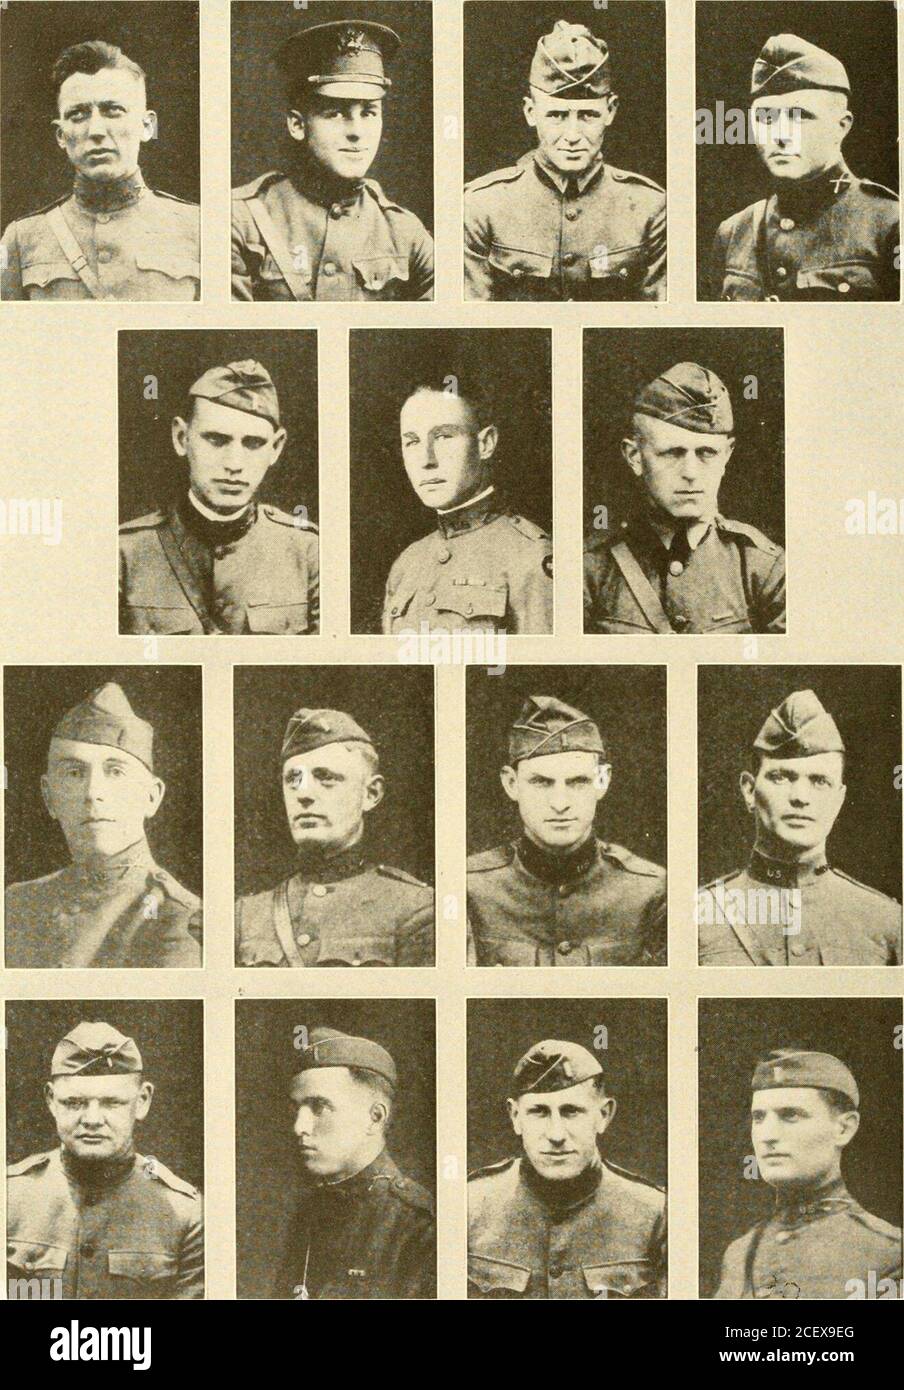 . Illinois in the World War; an illustrated record prepared with the coöperation and under the direction of the leaders in the state's military and civilian organizations. SECOND LIEUTENANTS OF THE 131ST INFANTRYTop row: Frank C. Albright, George W. Hall, J. Wilmen Brewer, Benjamin A. Brown.Second row: Richard H. Buvens, Jr., Thomas K. Cobb, Herbert S. Davies.Third row: Walter J. Deal, Morris E. Dent, Edmund A. Duffett, Howard J. Frisbey.Bottom row: Jesse R. Frye, Morris Goldstein, Thomas S. Guilfoyle, Burl S. Hall. 310 ILLINOIS IN THE WORLD WAR ^^^^H ^^m 5. SECOND LIEUTENANTS OF THE 131ST INF Stock Photo